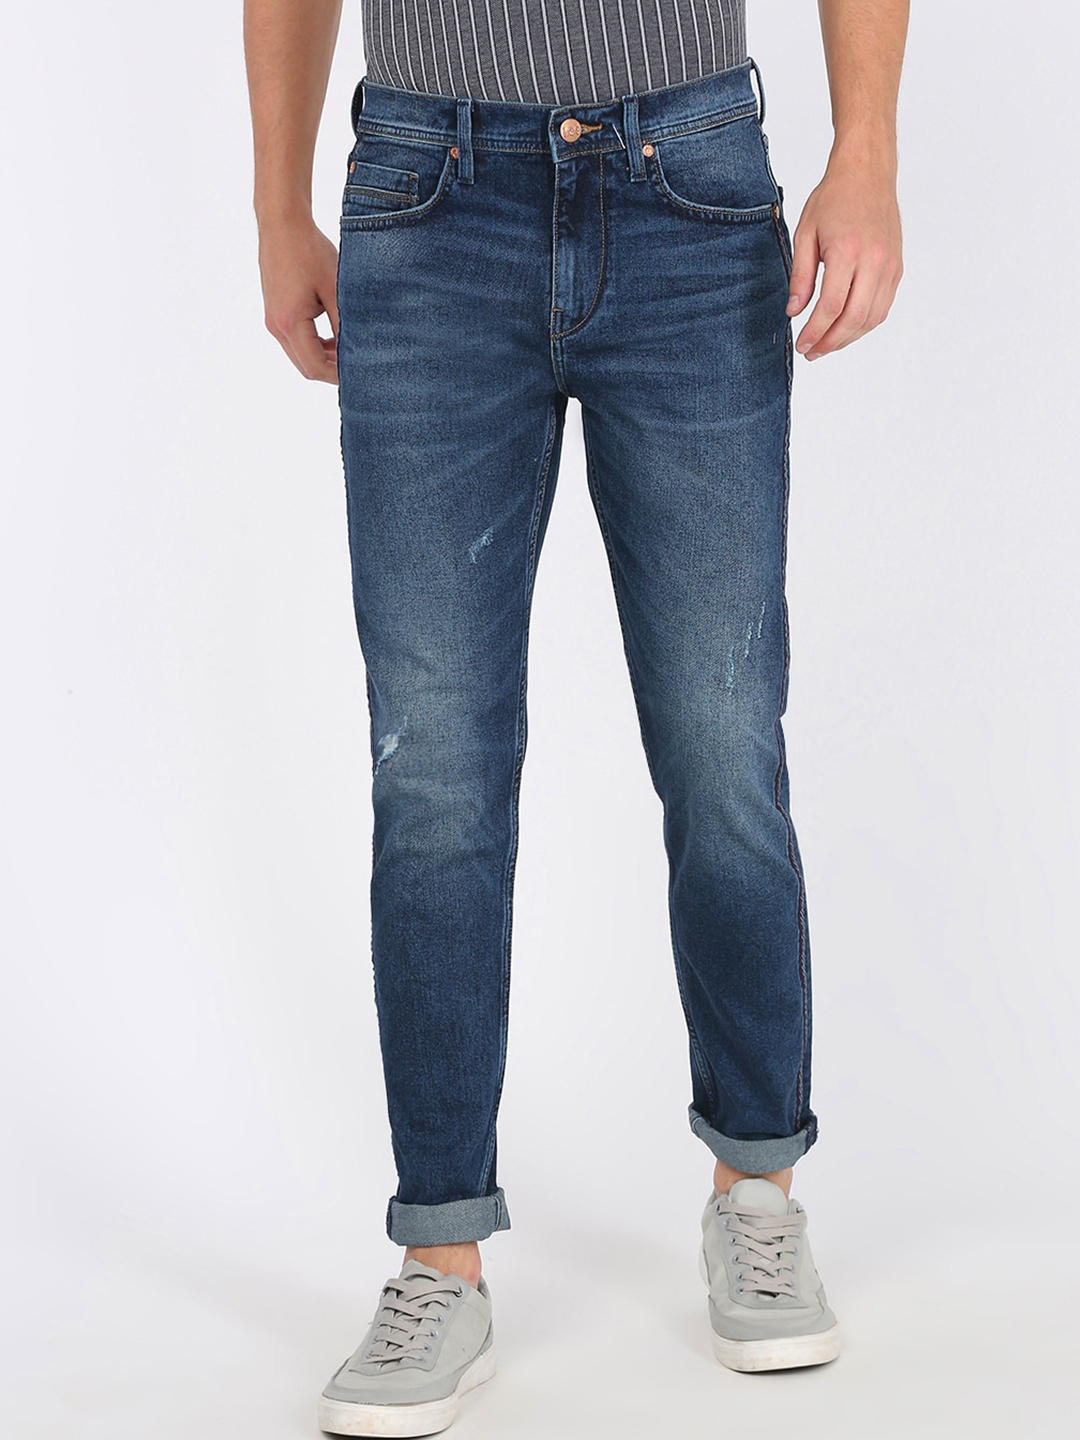 Lee Men s Jeans Best Price in India | Lee Men s Jeans Compare Price ...